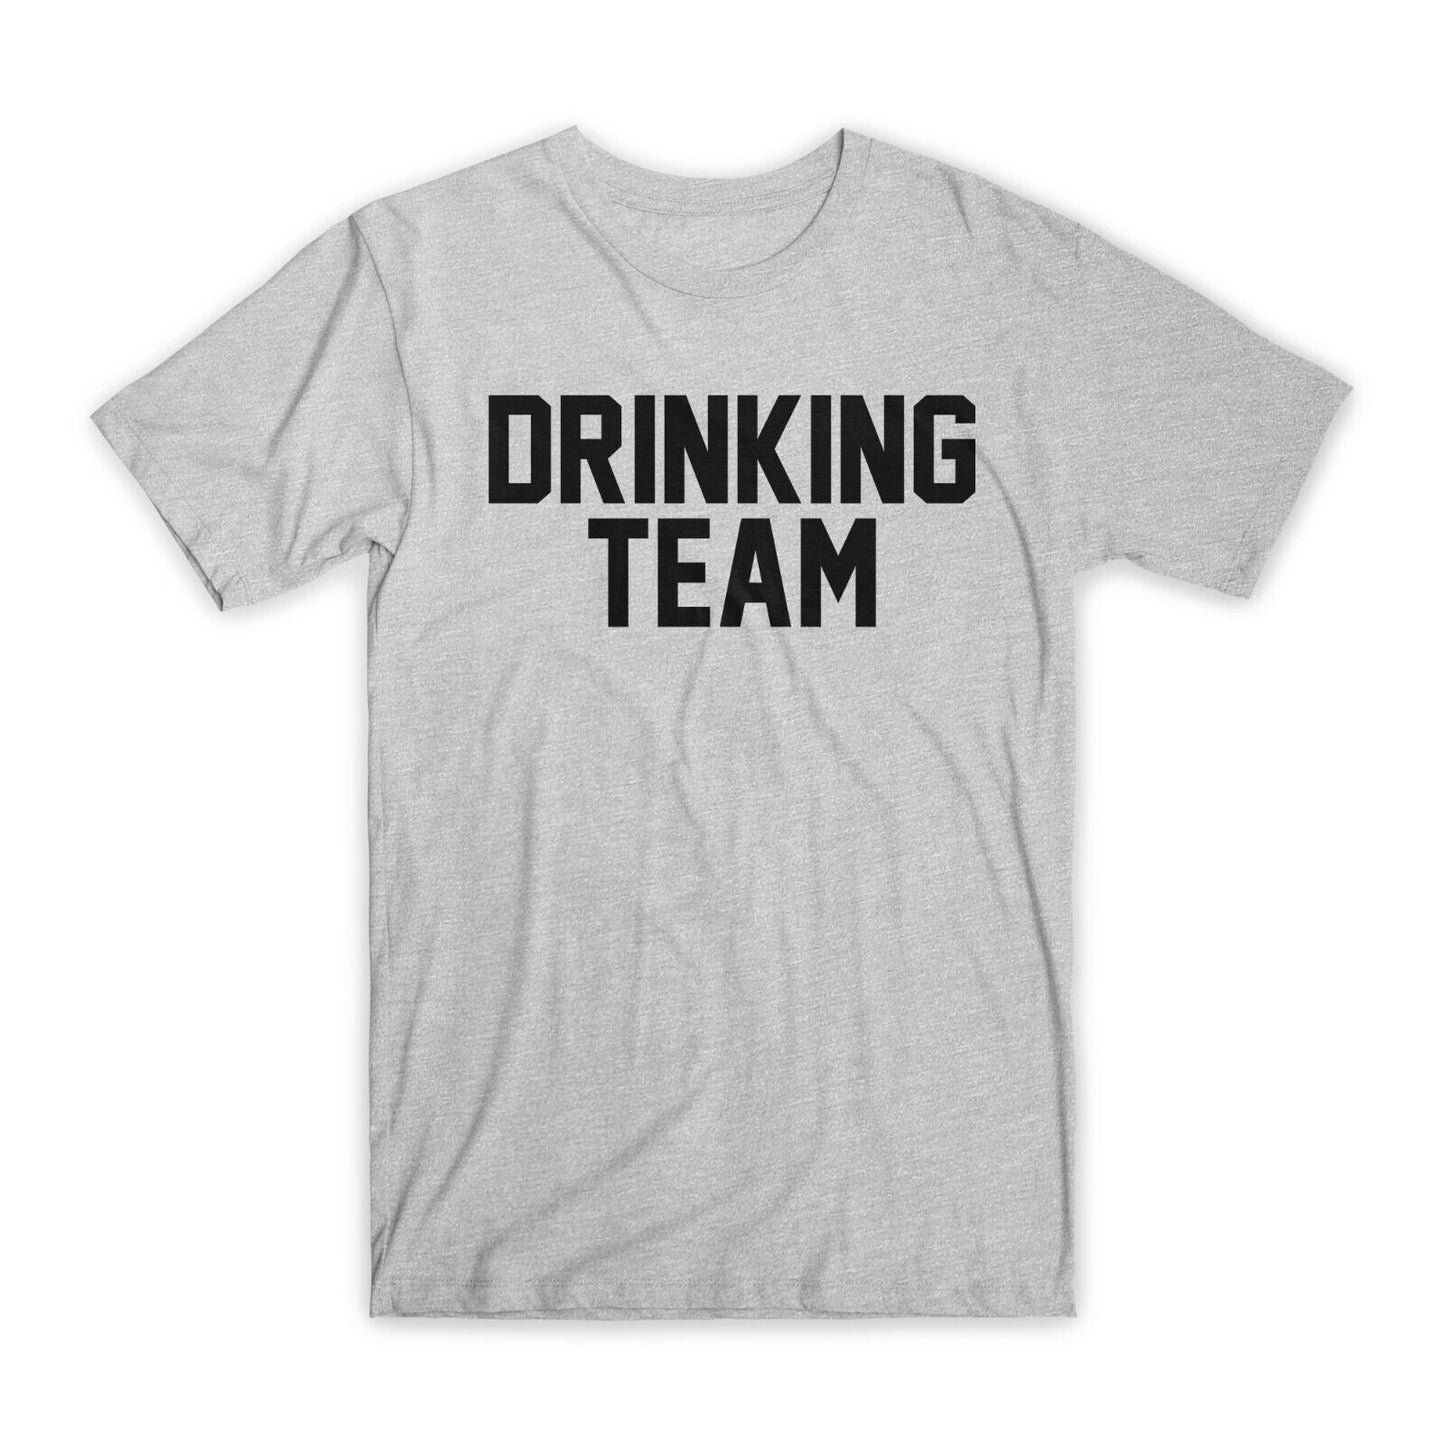 Drinking Team T-Shirt Premium Soft Cotton Crew Neck Funny Tees Novelty Gifts NEW